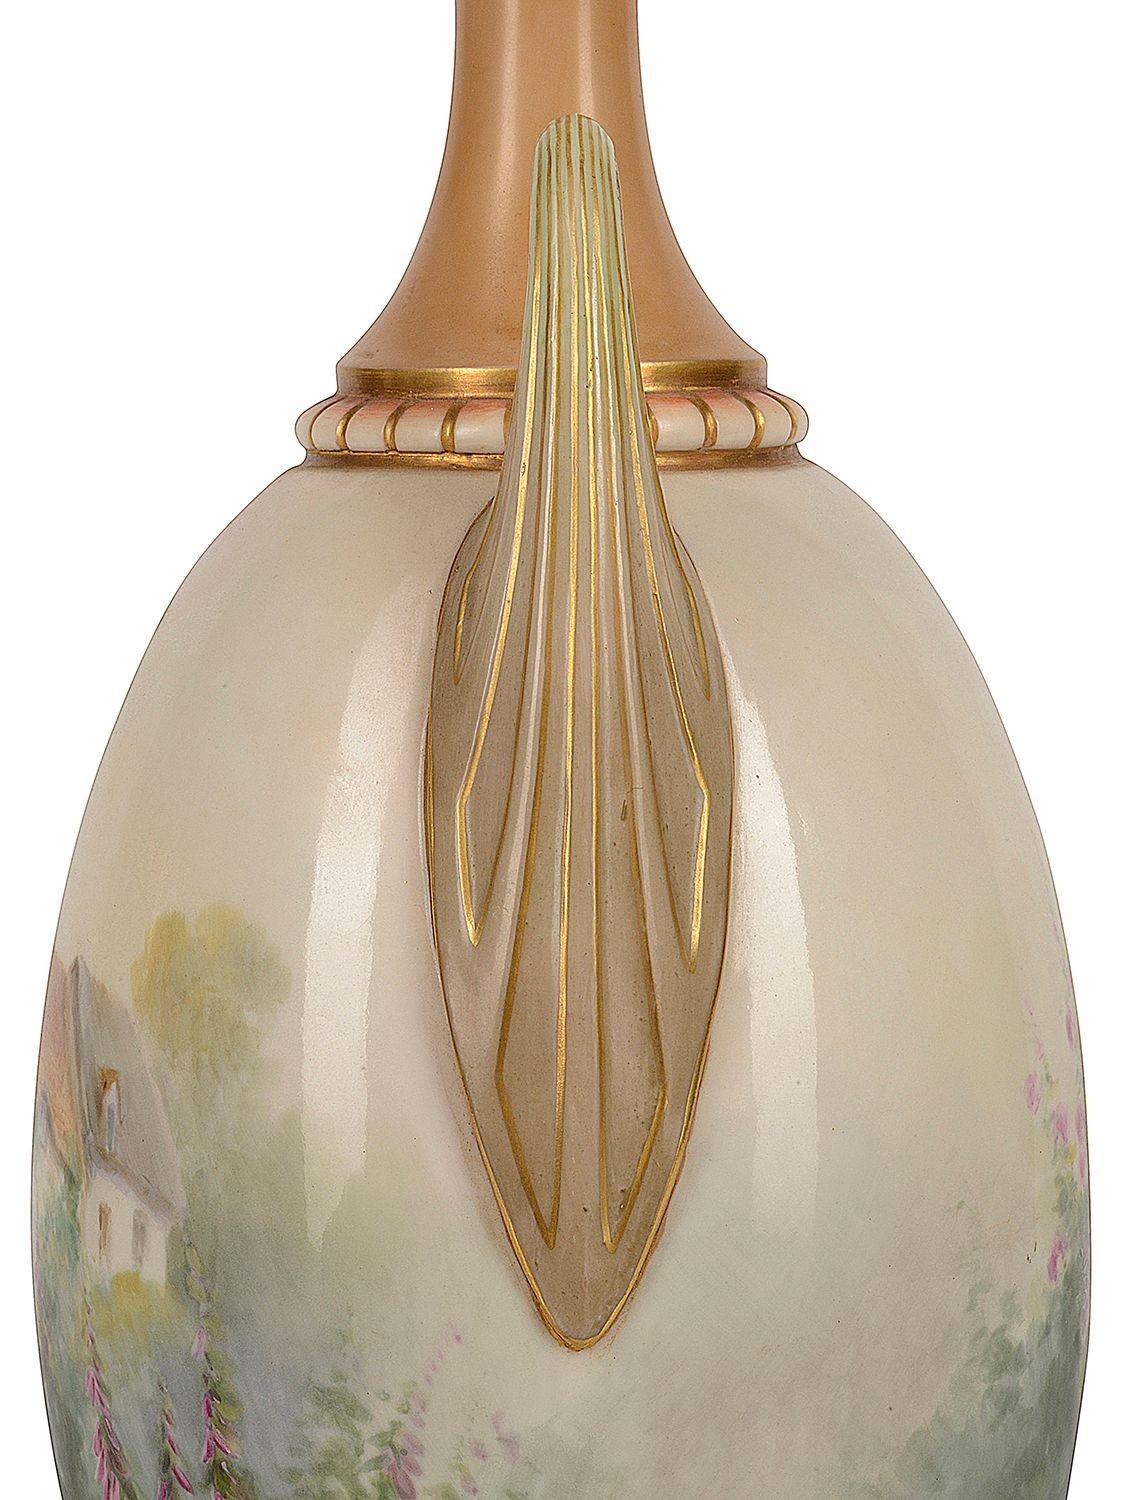 Royal Worcester Lidded Vase, Depicting a Thatched Cottage, Signed Harry Davis In Good Condition For Sale In Brighton, Sussex